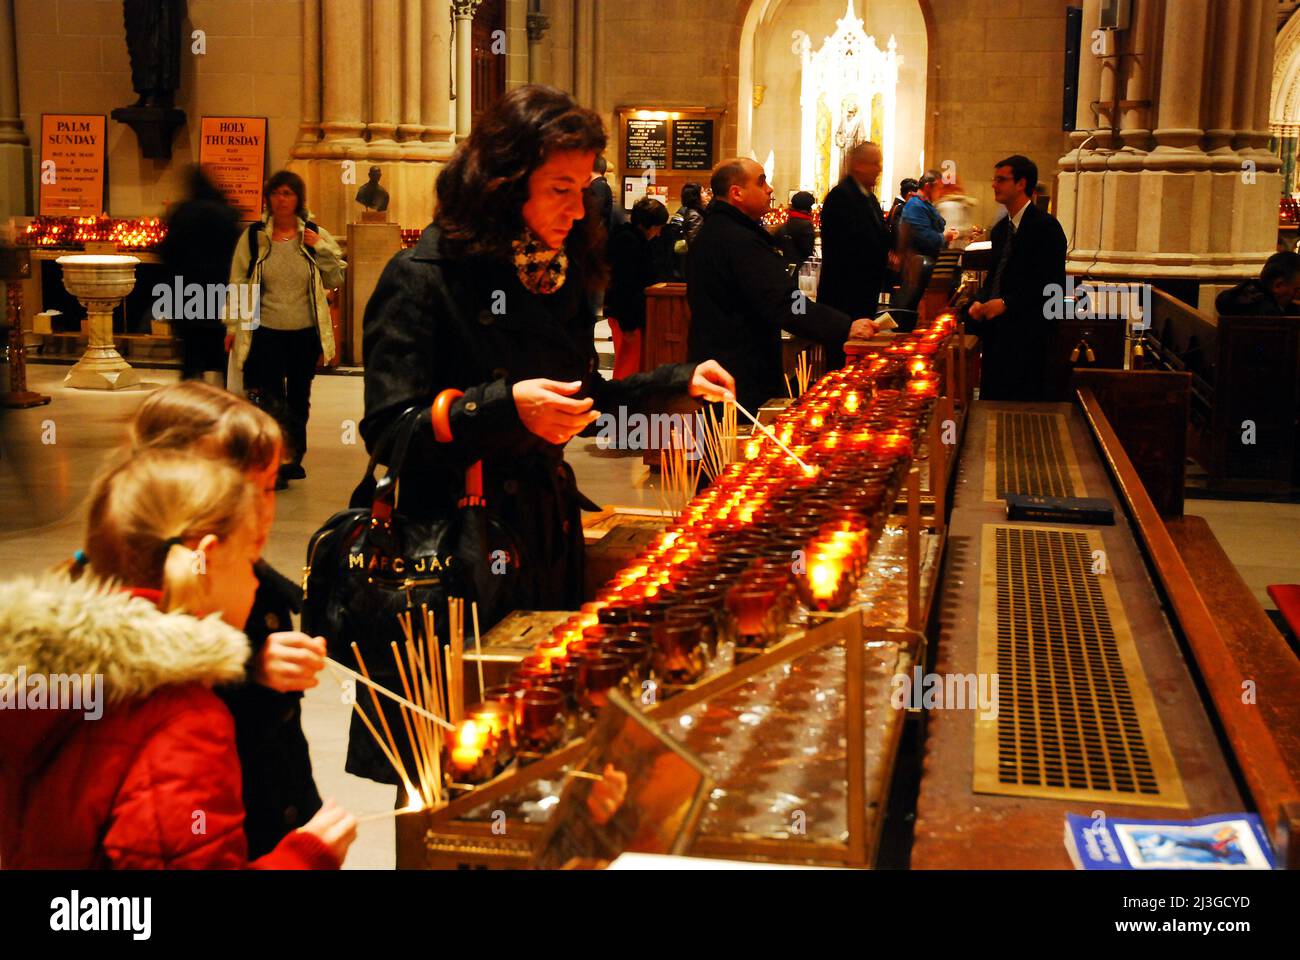 A mother and her daughters light prayer candles at St Patrick's Cathedral in New York City Stock Photo